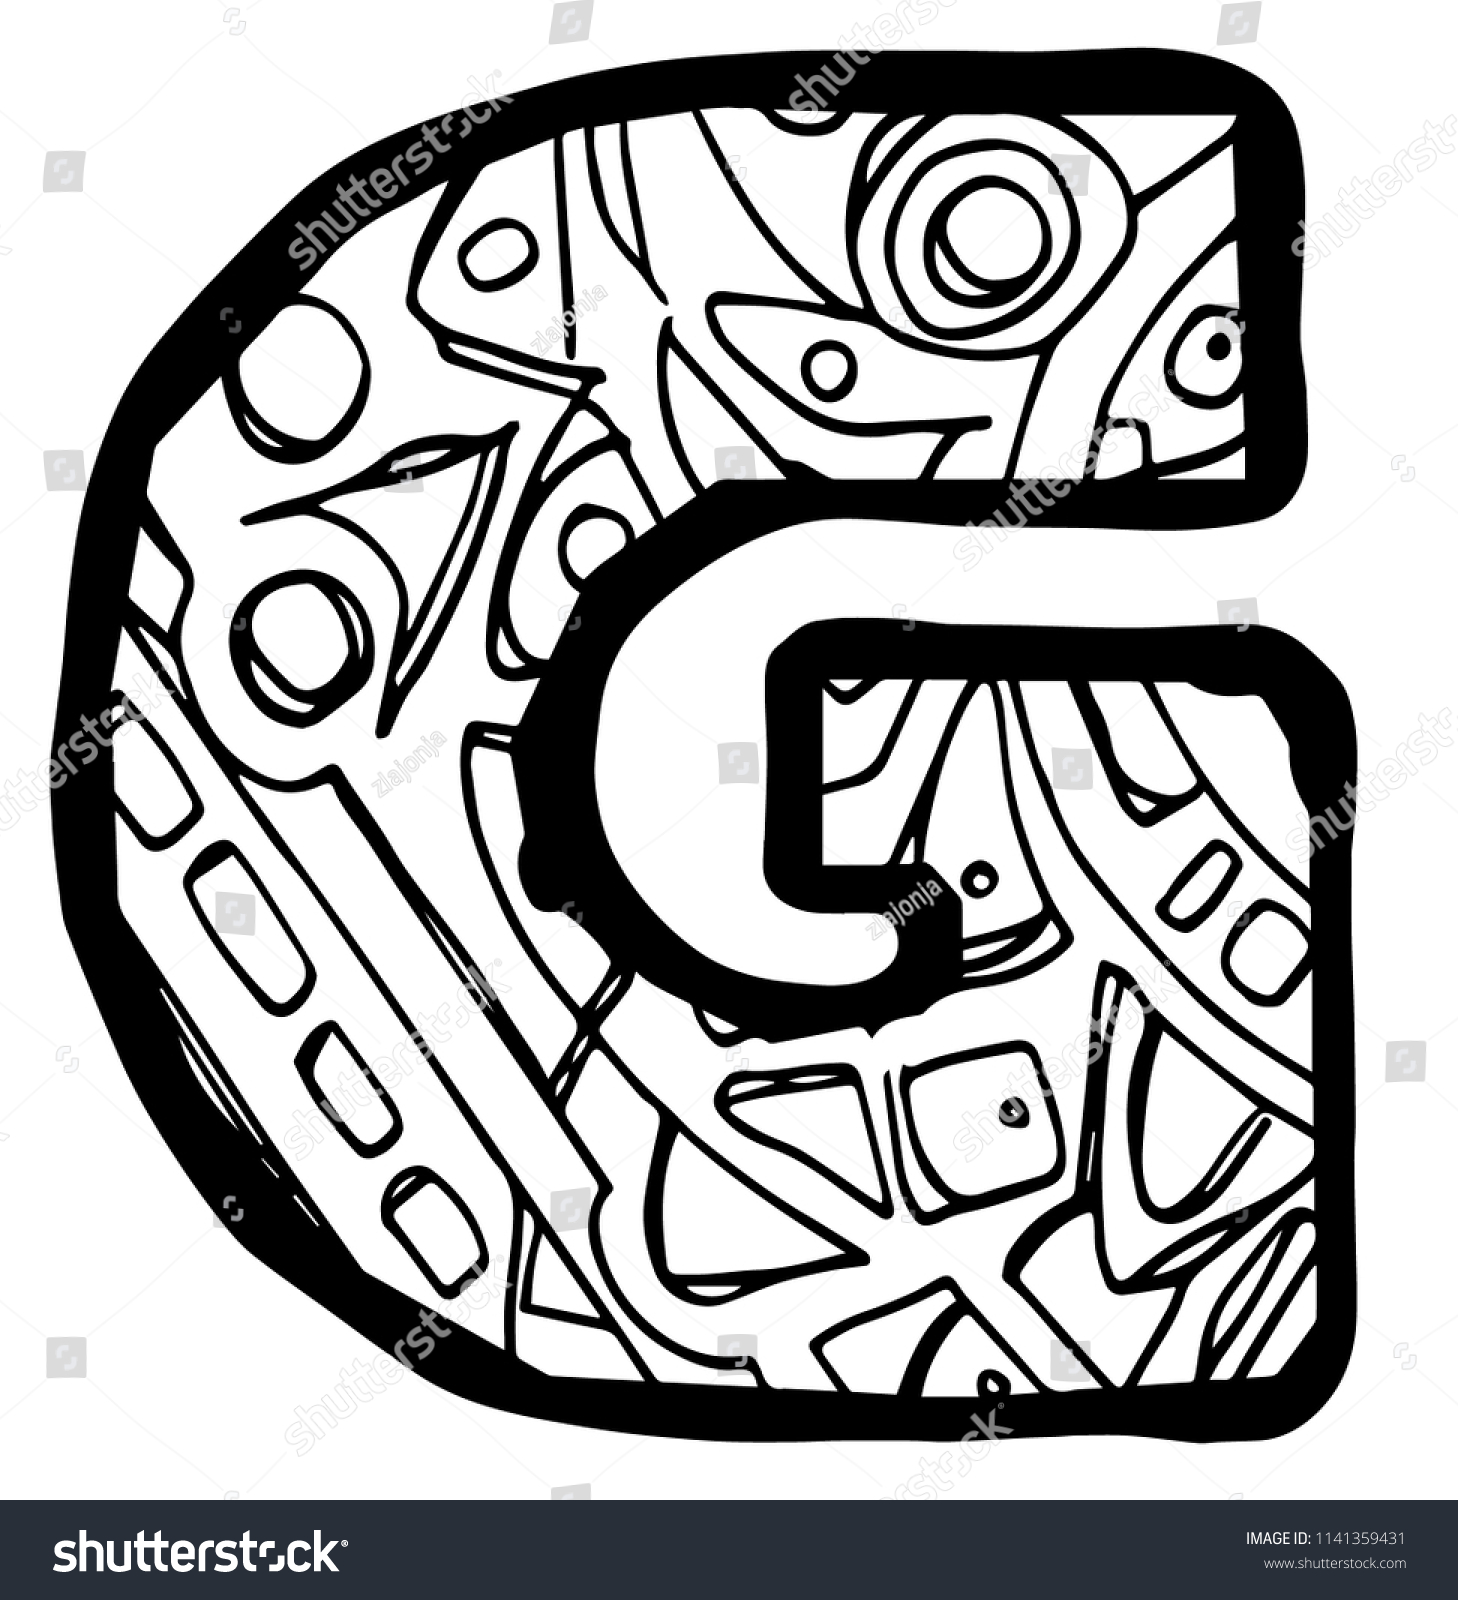 Letter g coloring page stock vector royalty free